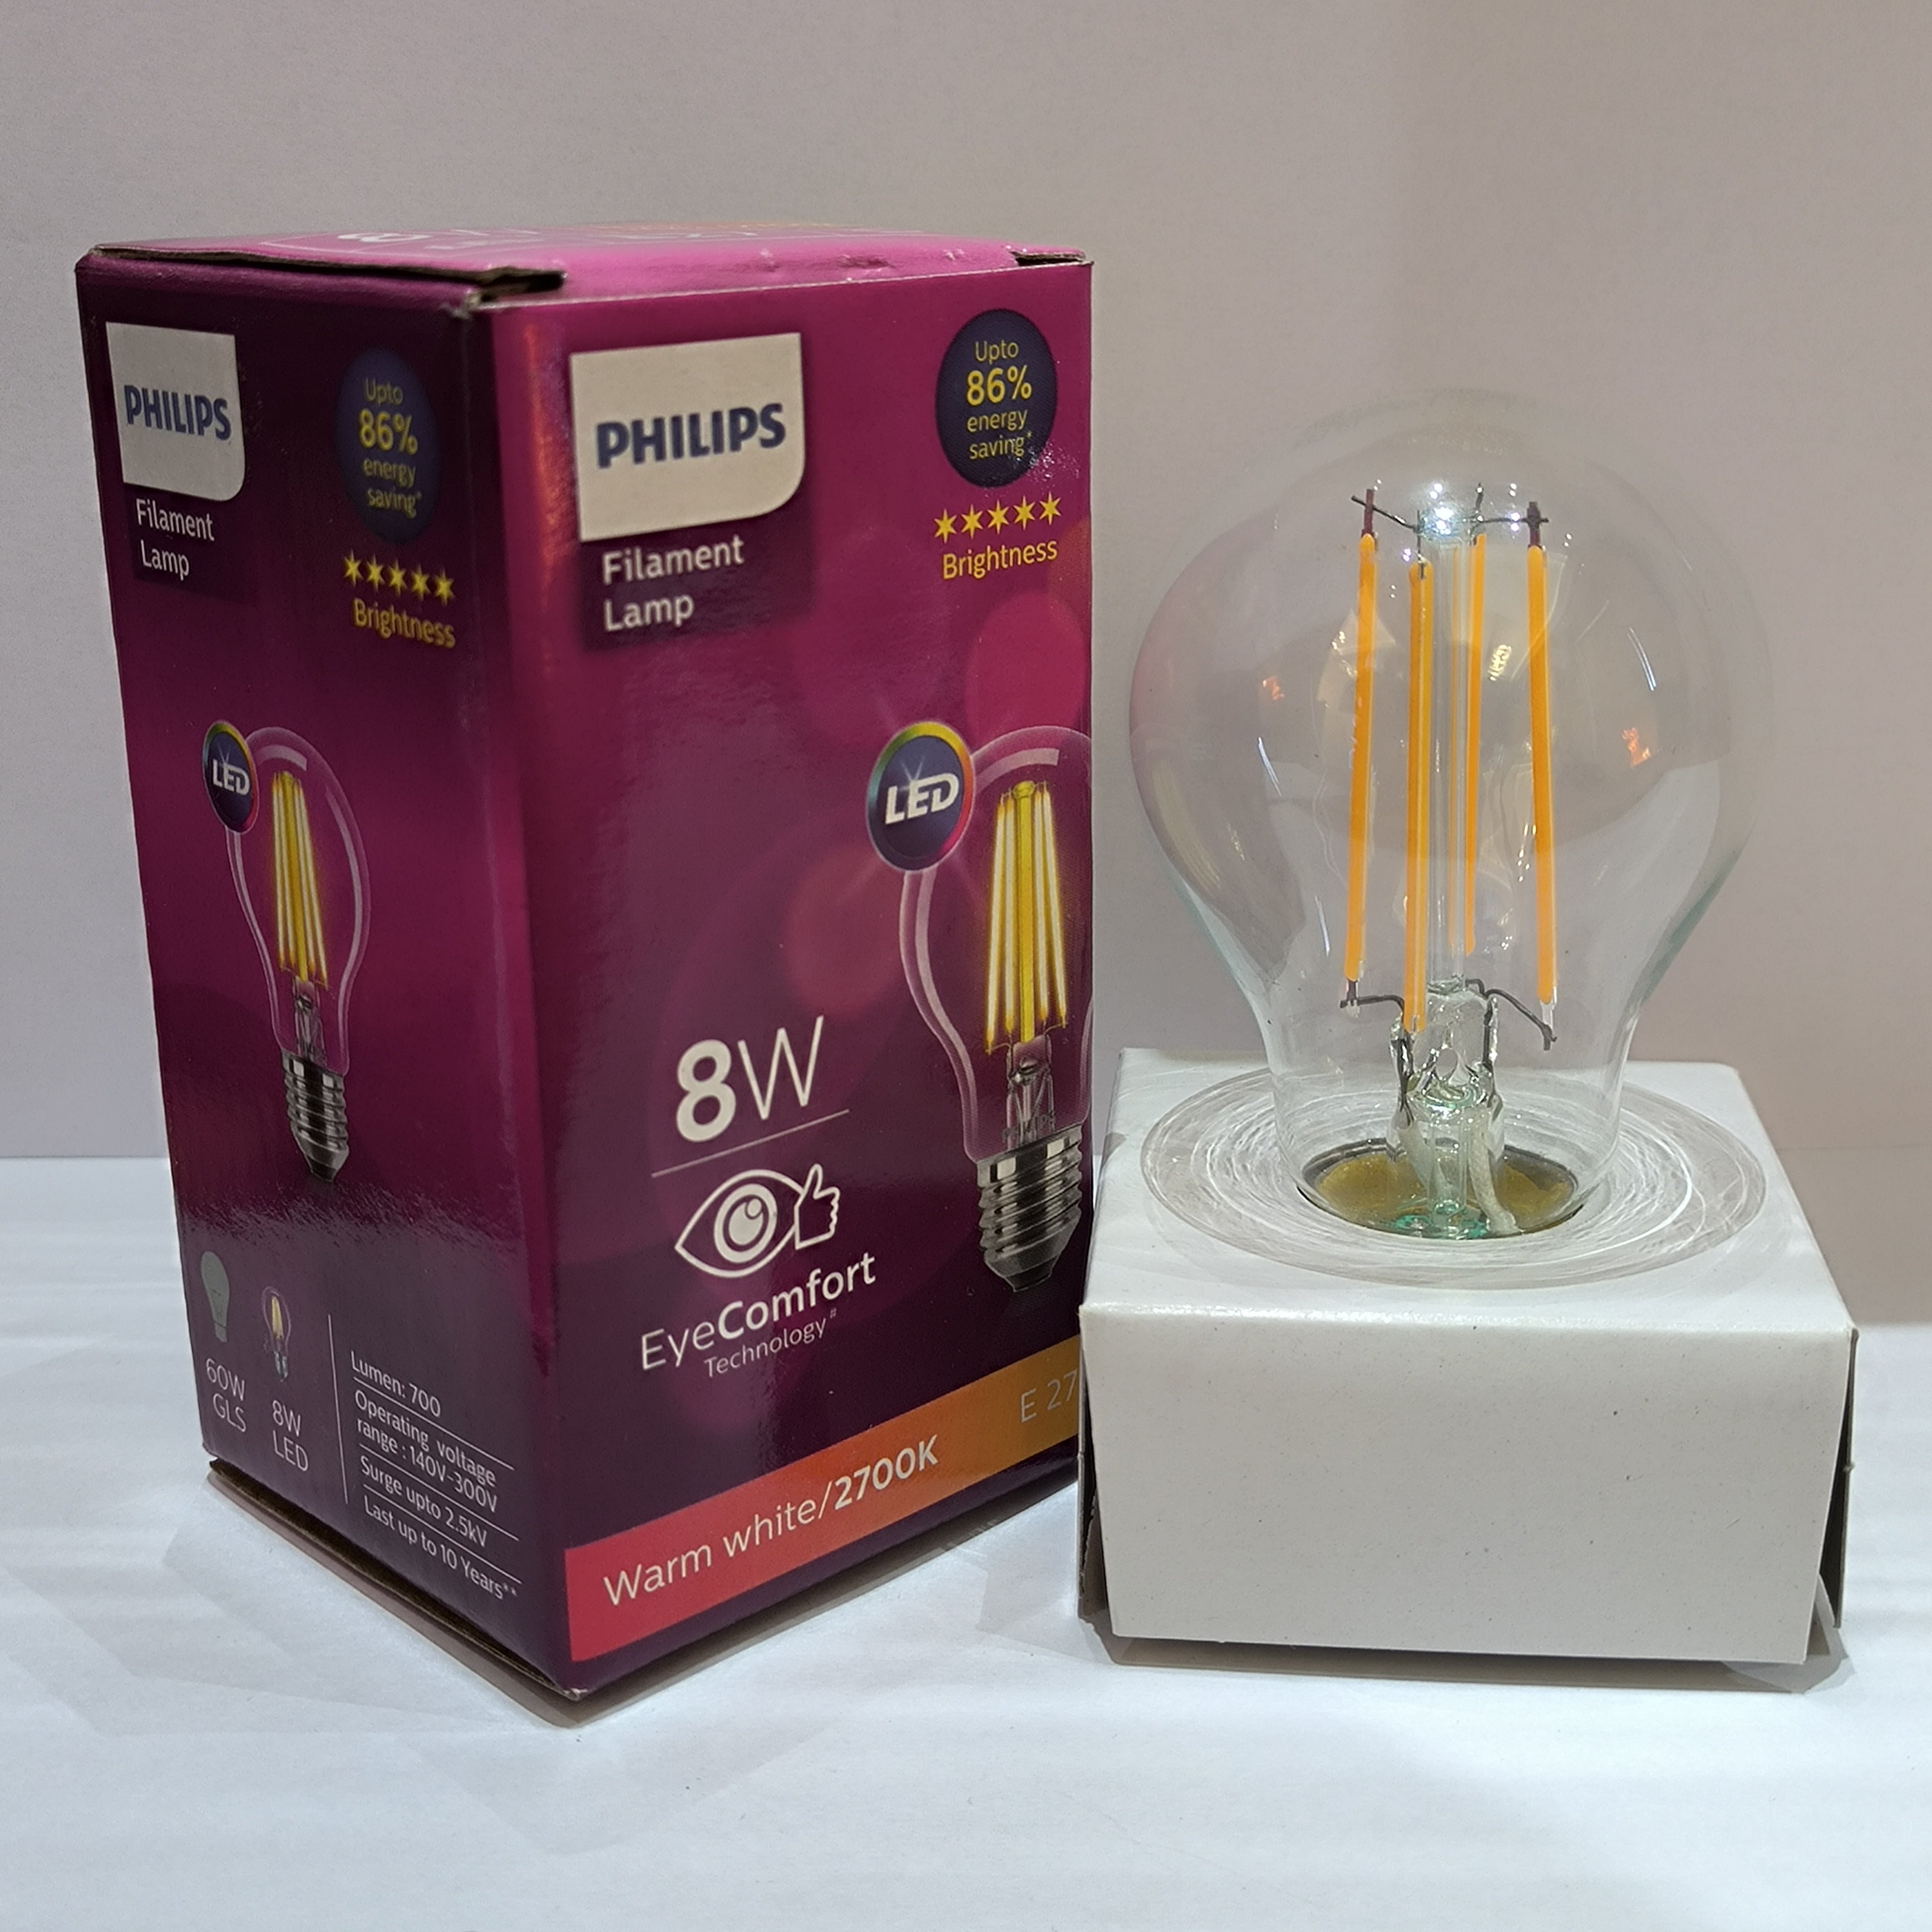 Philips E-27 Filament Lamp Round Shape Warm White Bulb - 8w LED at the Best Price